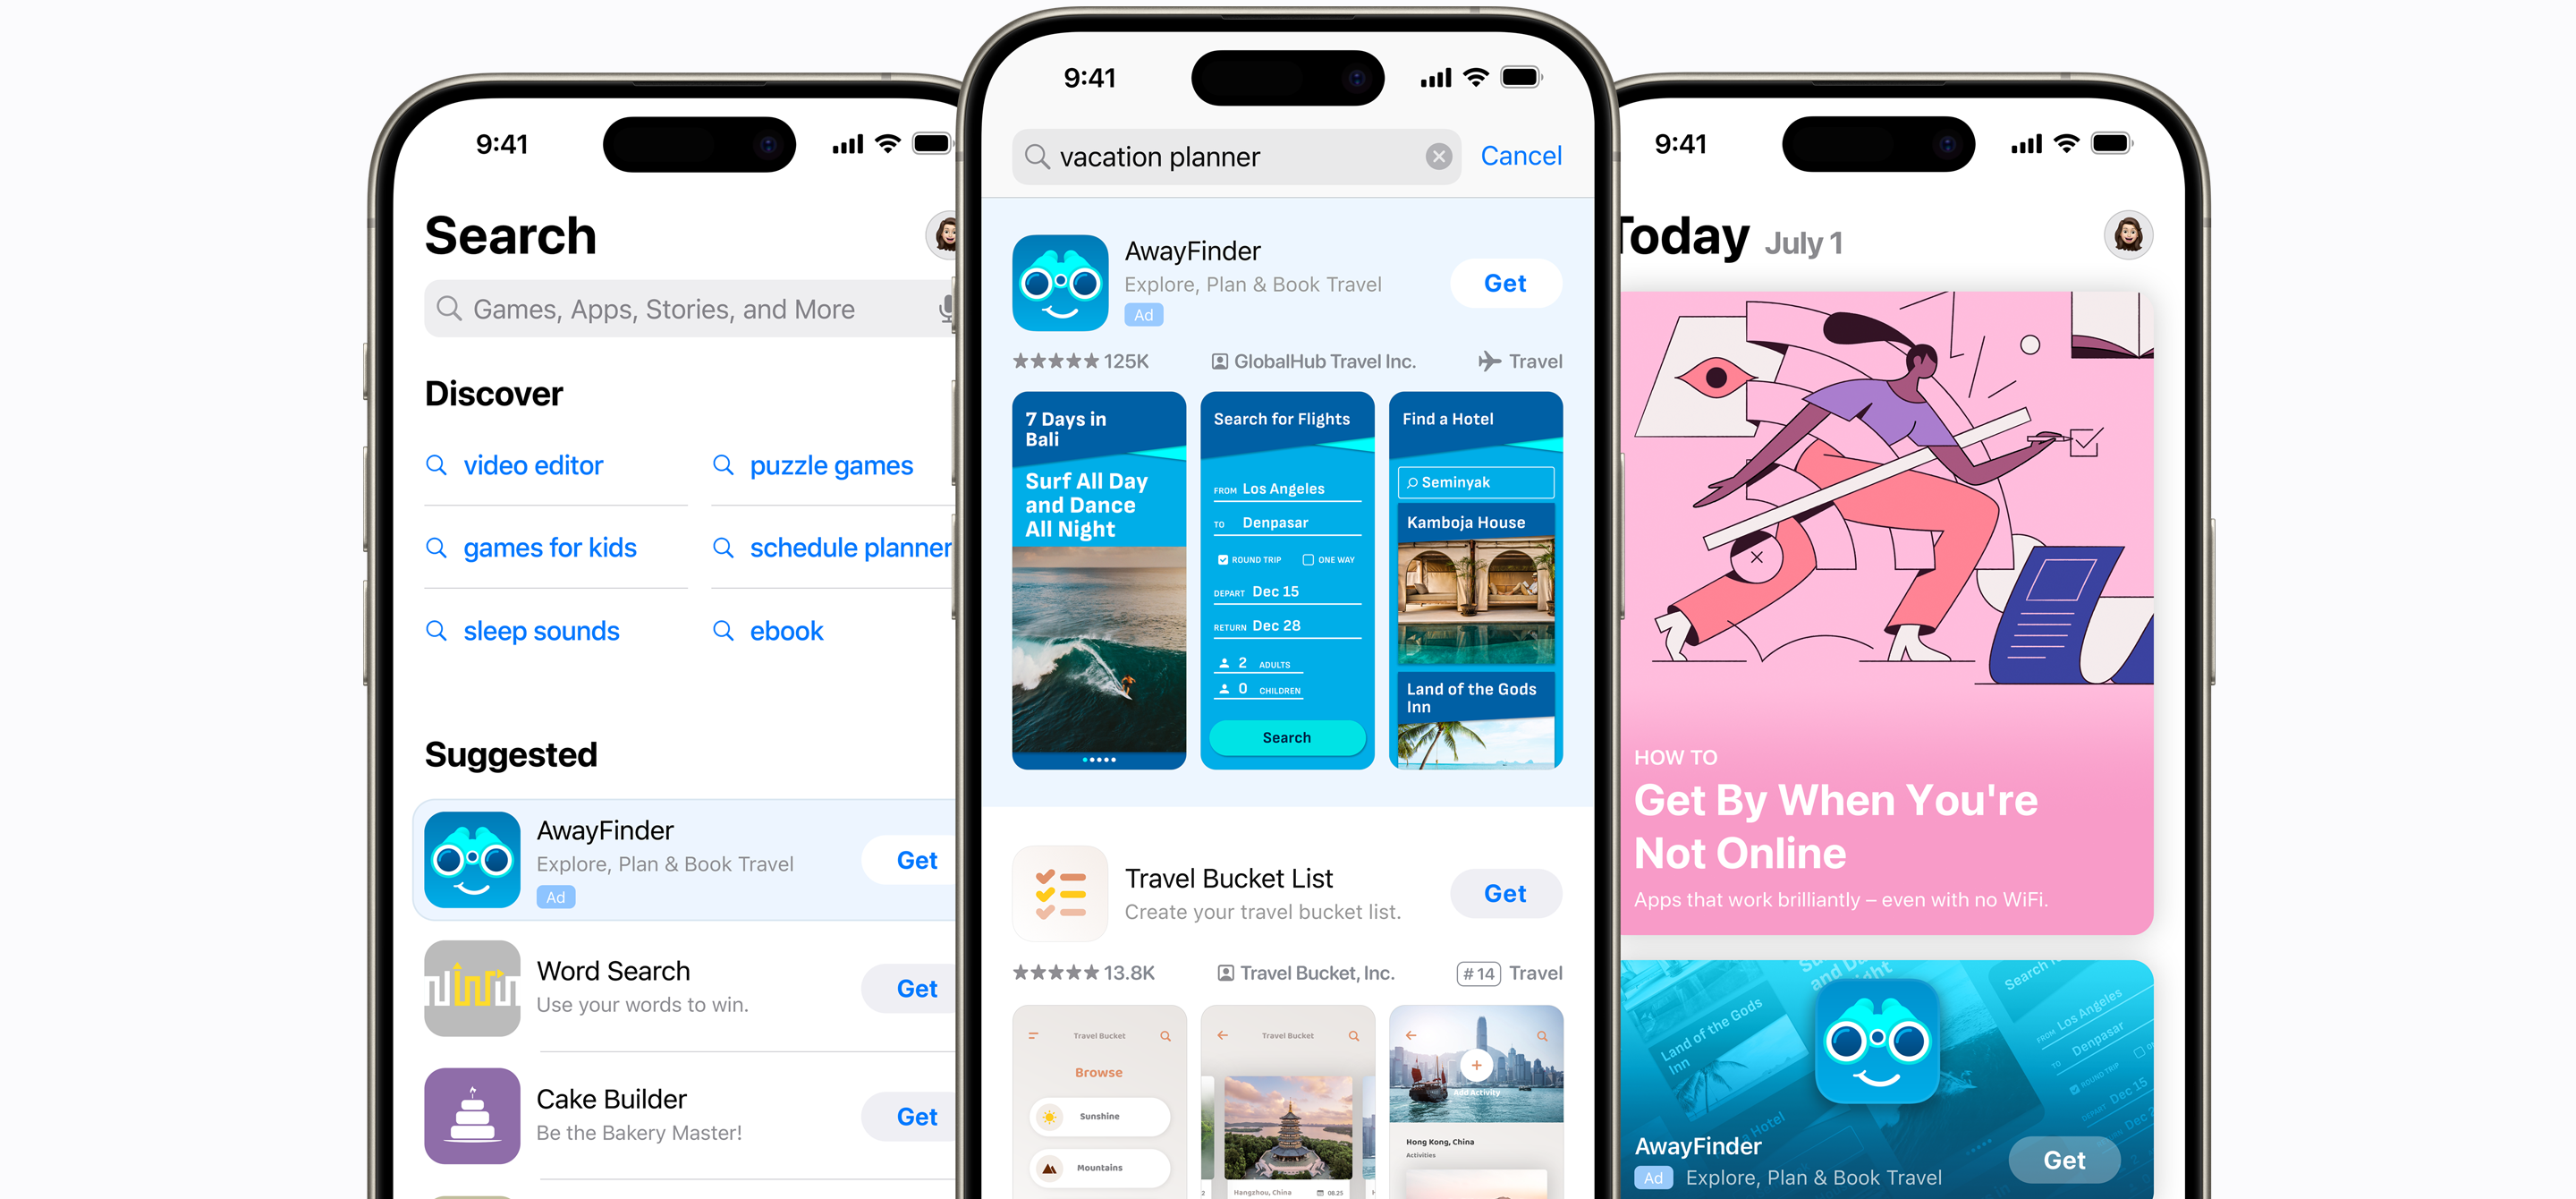 Three iPhones showing different ad placements on the App Store. The first shows the Search tab with an ad for the example app AwayFinder at the top of the Suggested apps list. The second shows a search results ad for AwayFinder appearing at the top of search results for the search term “vacation planner.”. The third shows the Today tab with an ad for AwayFinder prominently placed on the page.